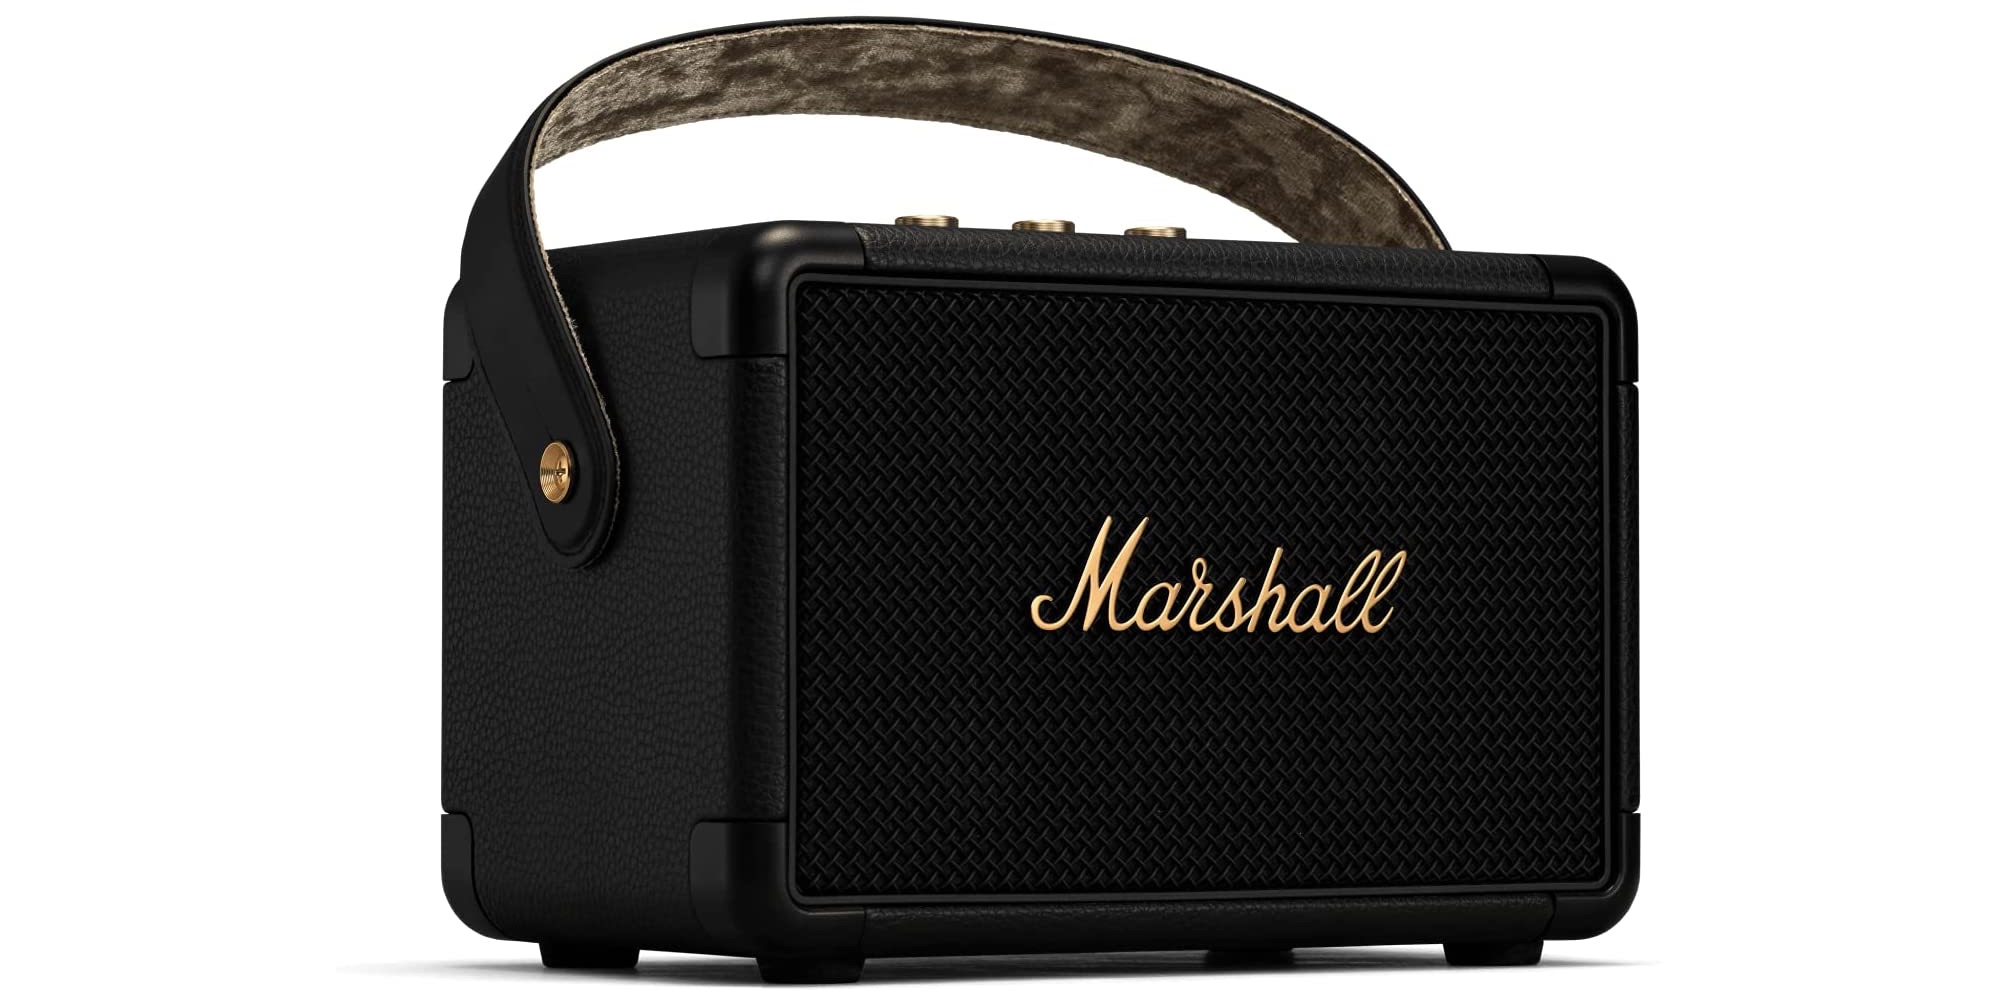 Marshall's popular vinyl-wrapped portable Bluetooth speakers on sale from  $130